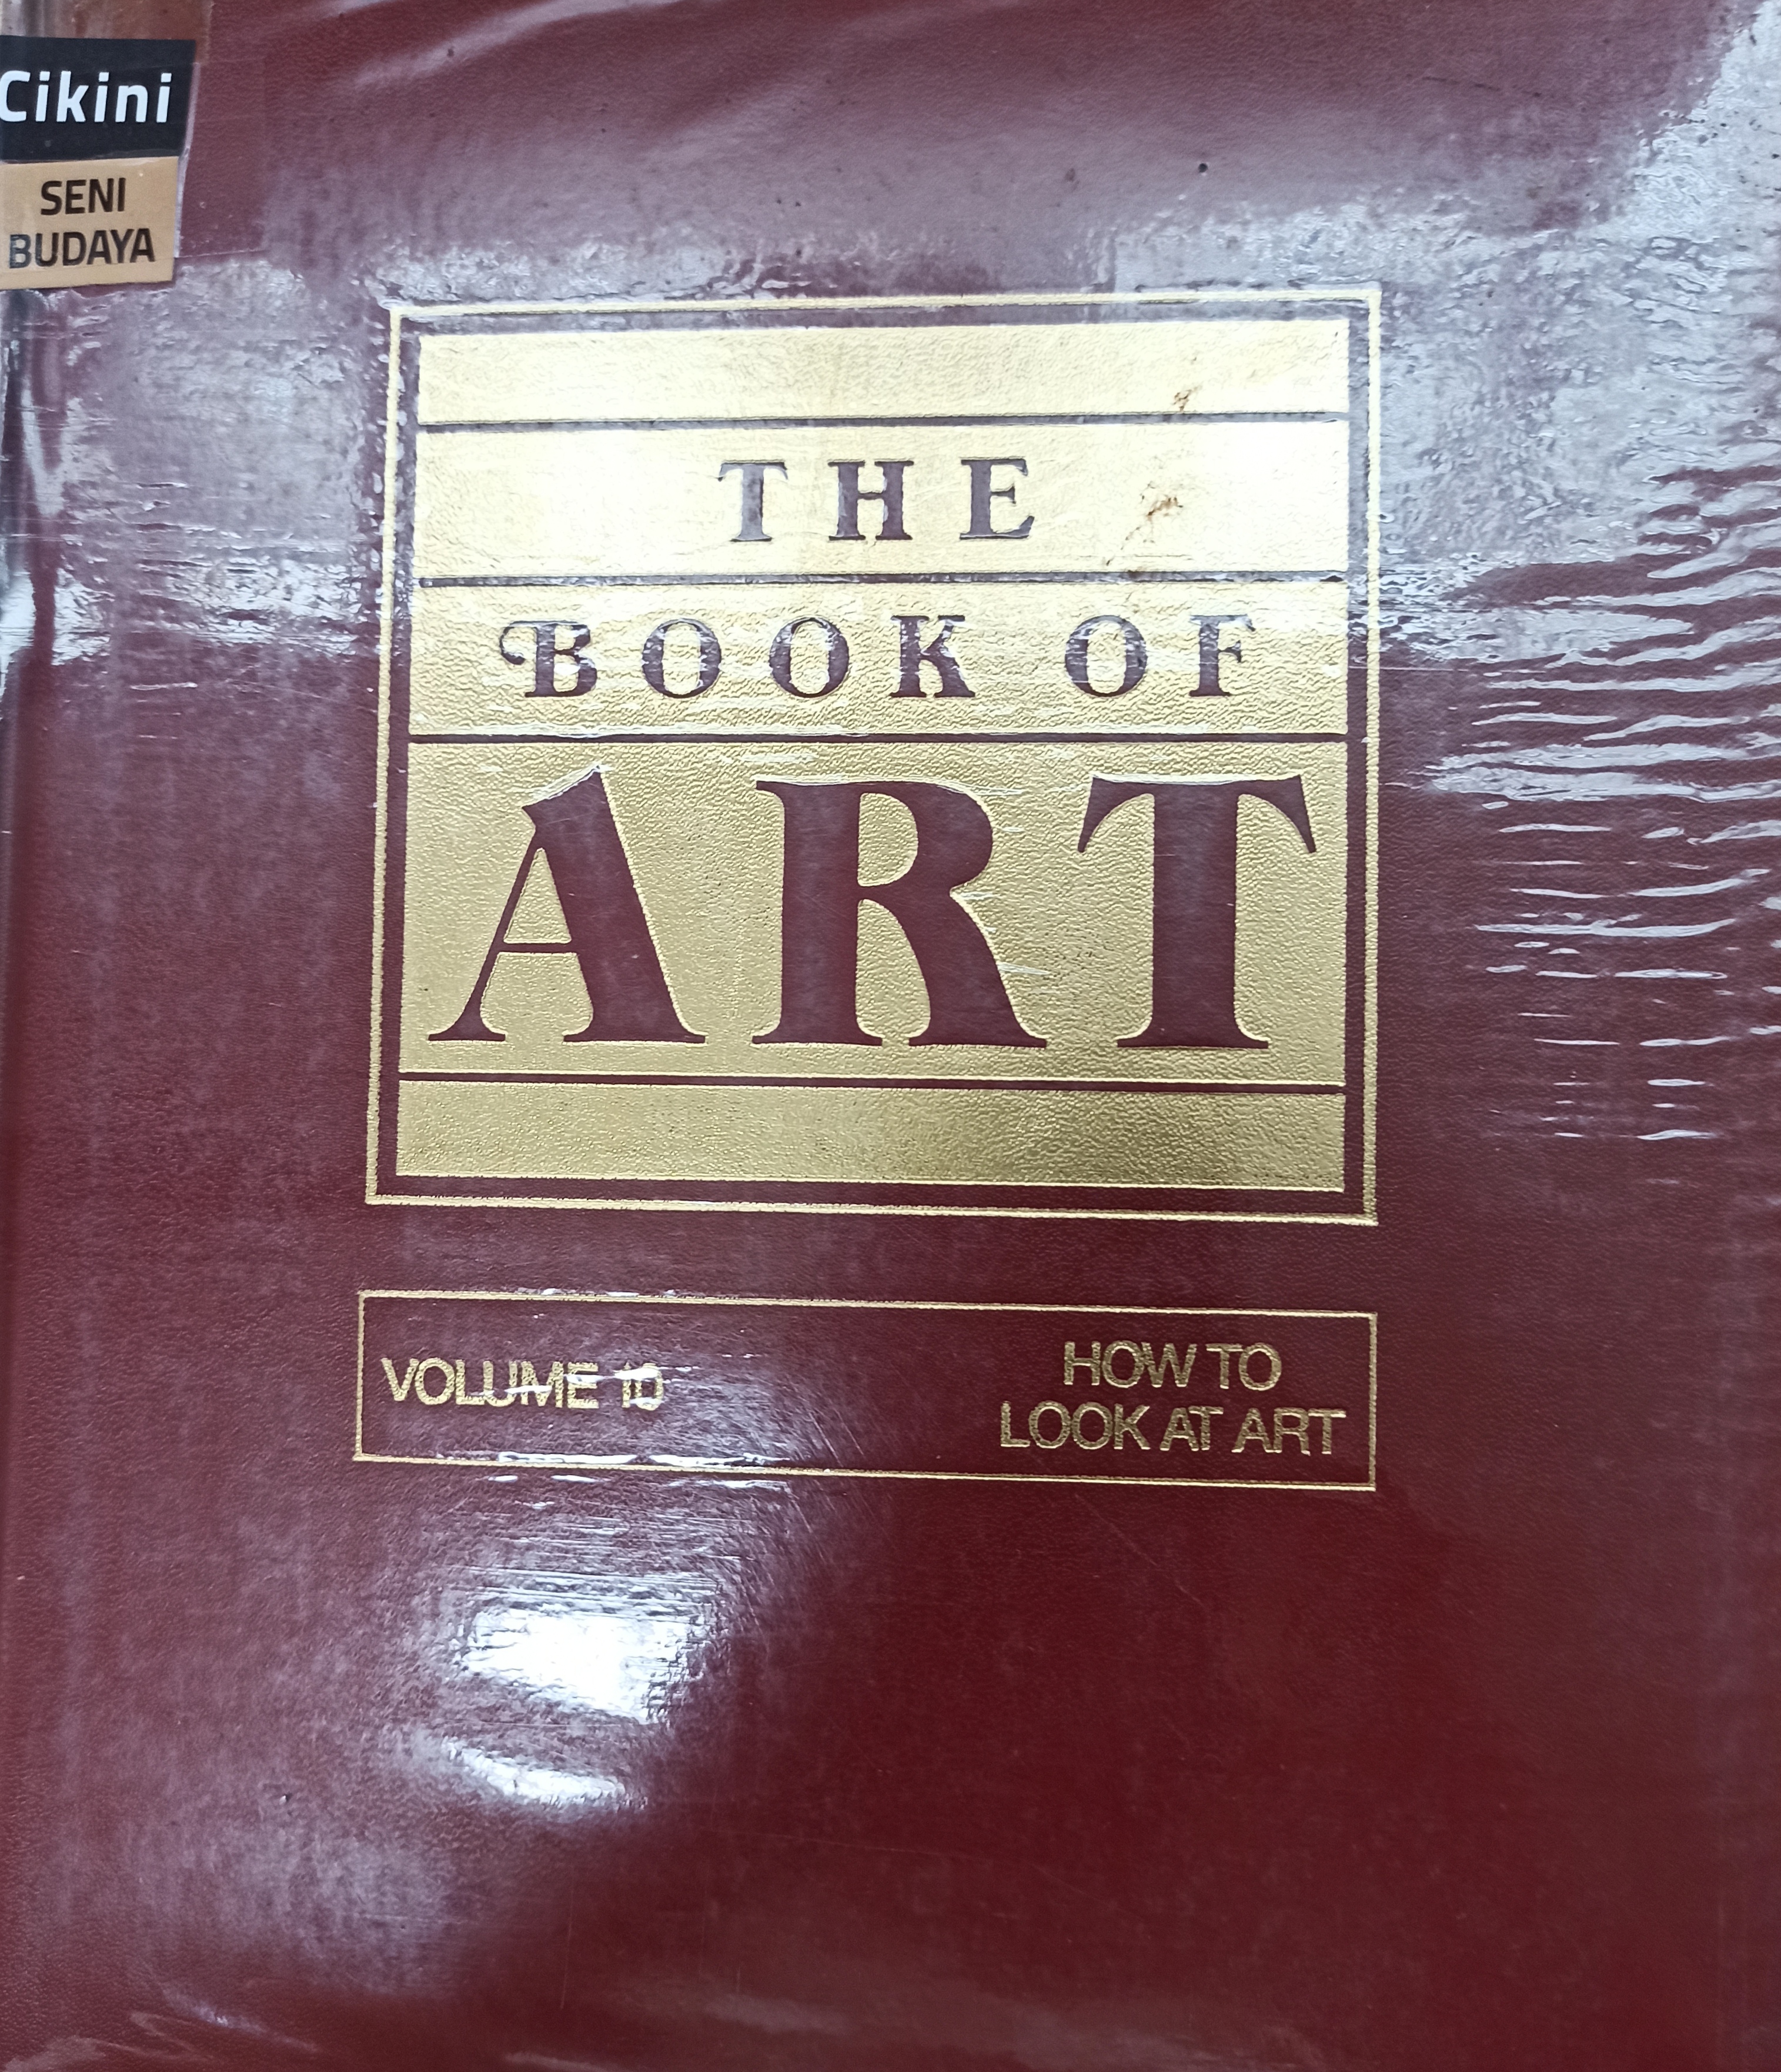 The book of art : a pictorial encyclopedia of painting, drawing and sculpture. volume 10. how to look at art